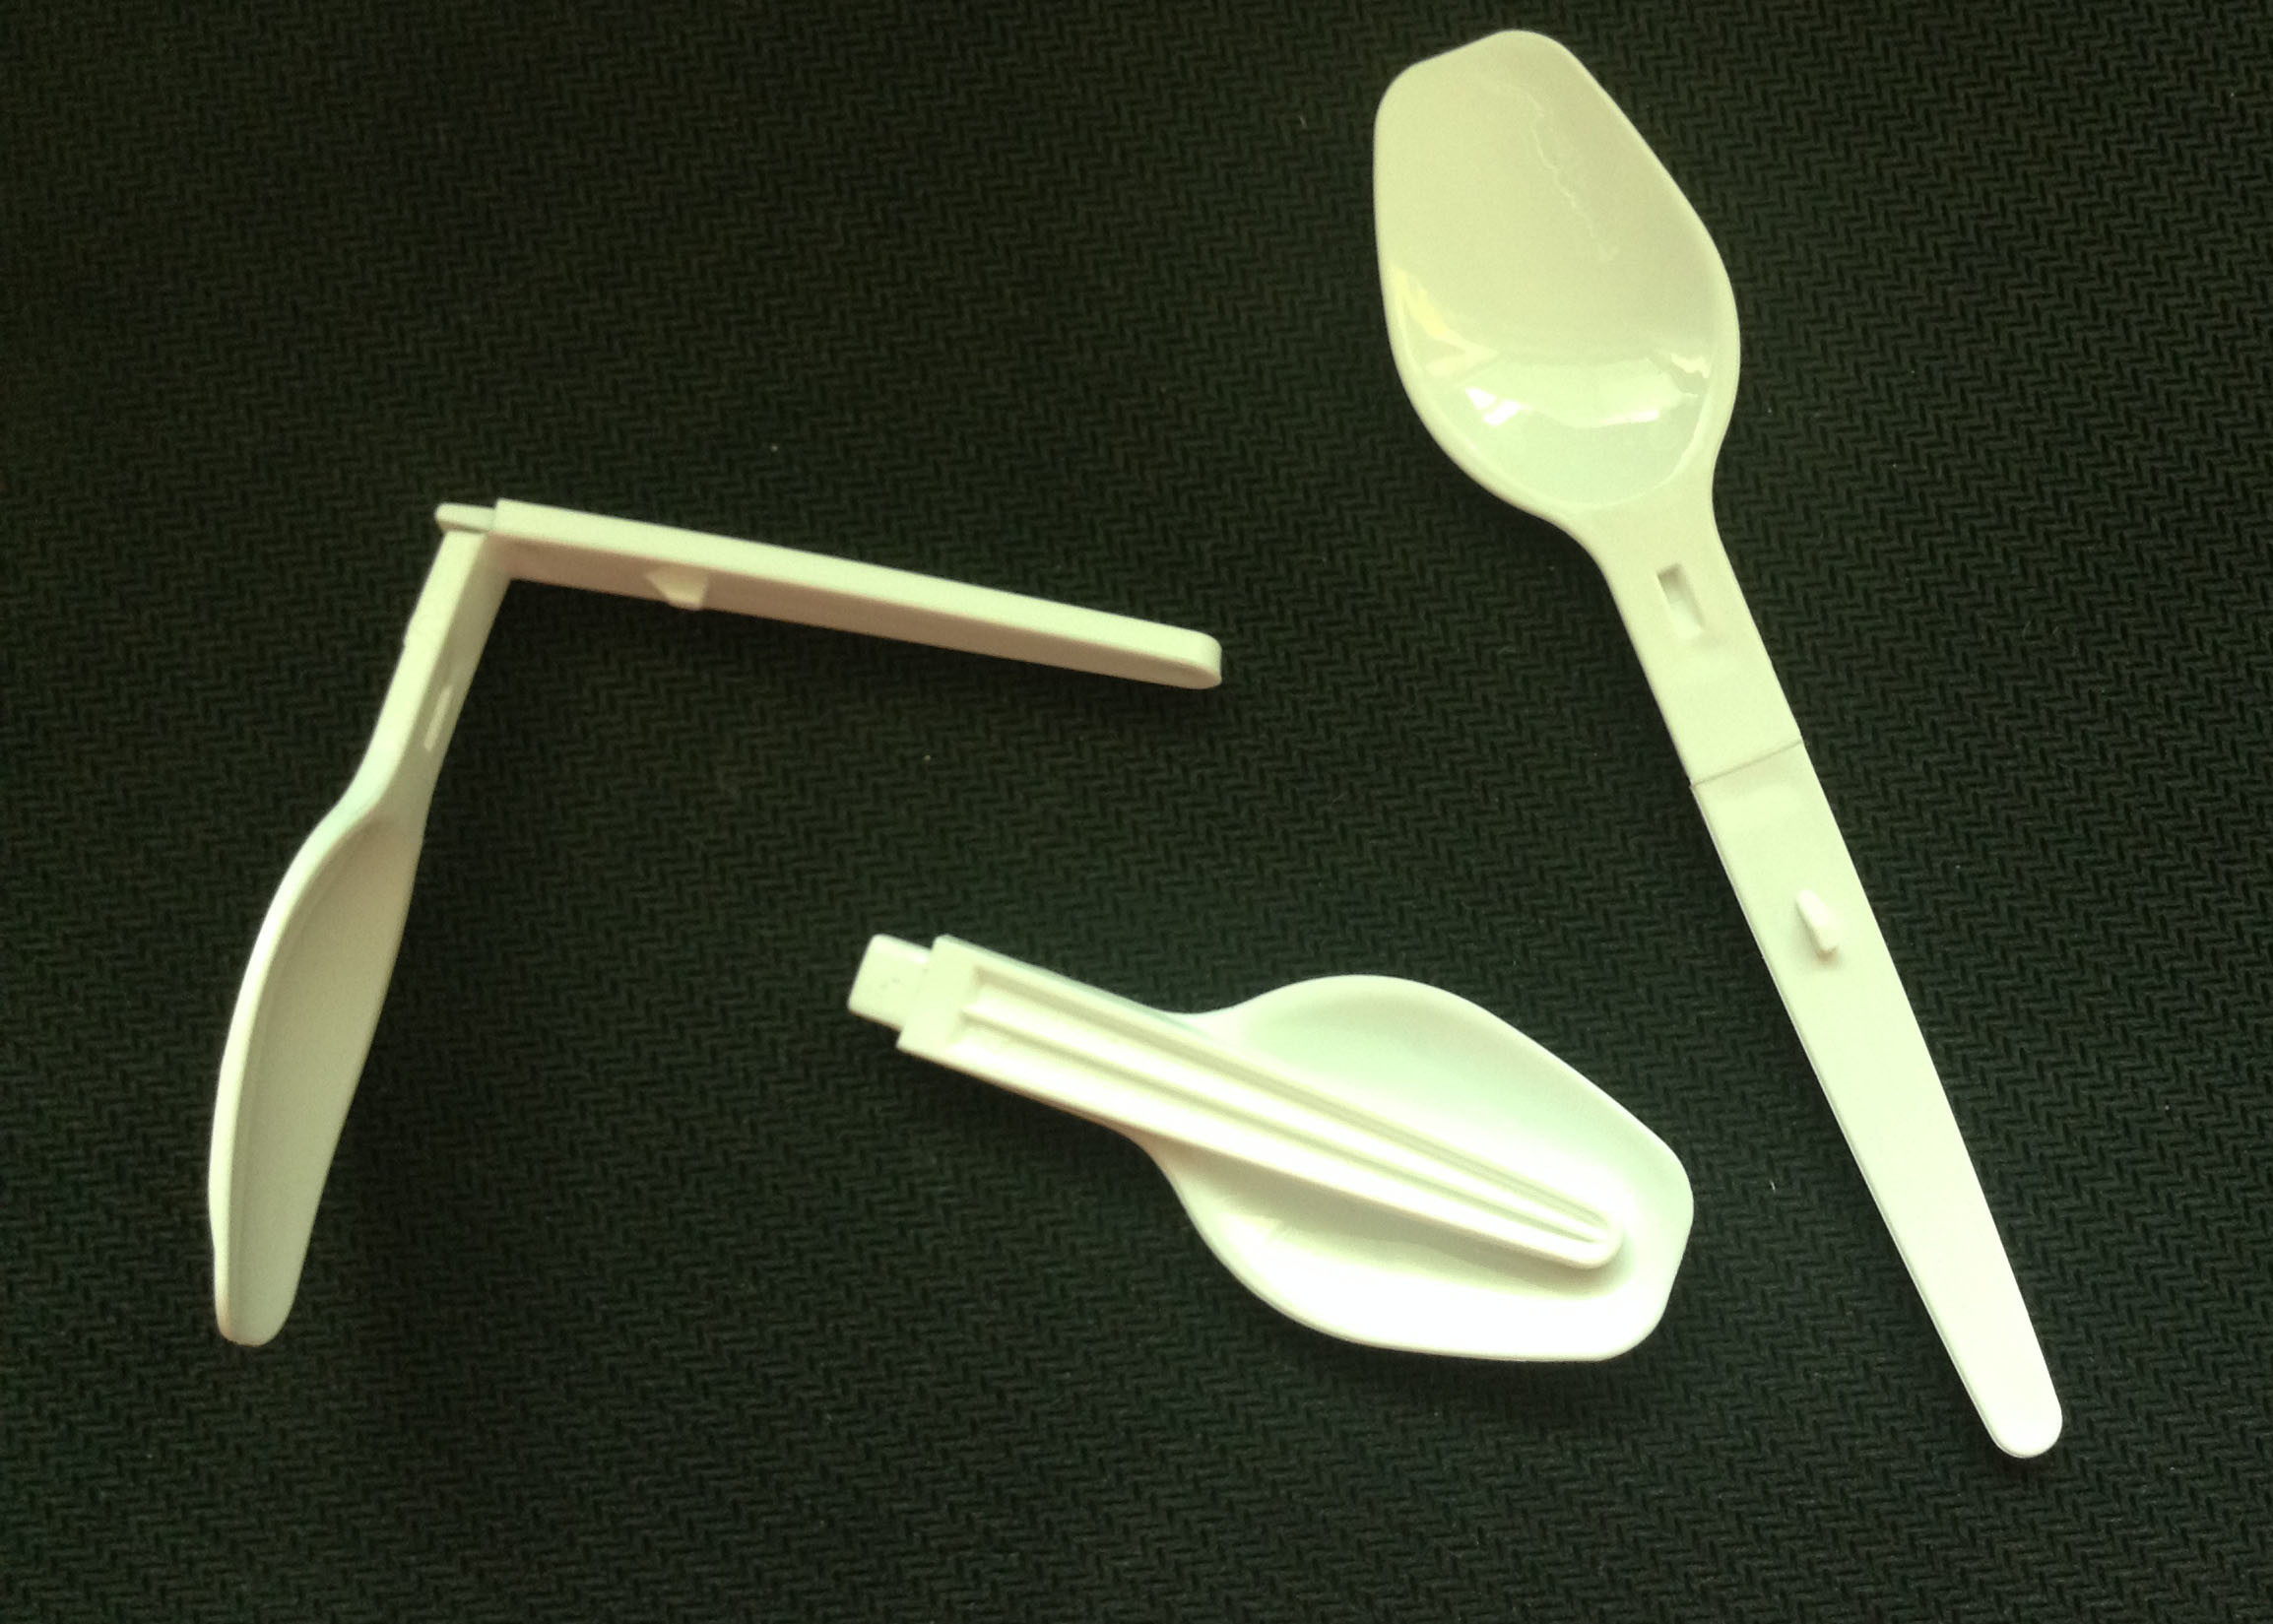 Food-grade plastic PP material folding spoon in 92 mm length folding size 54 mm